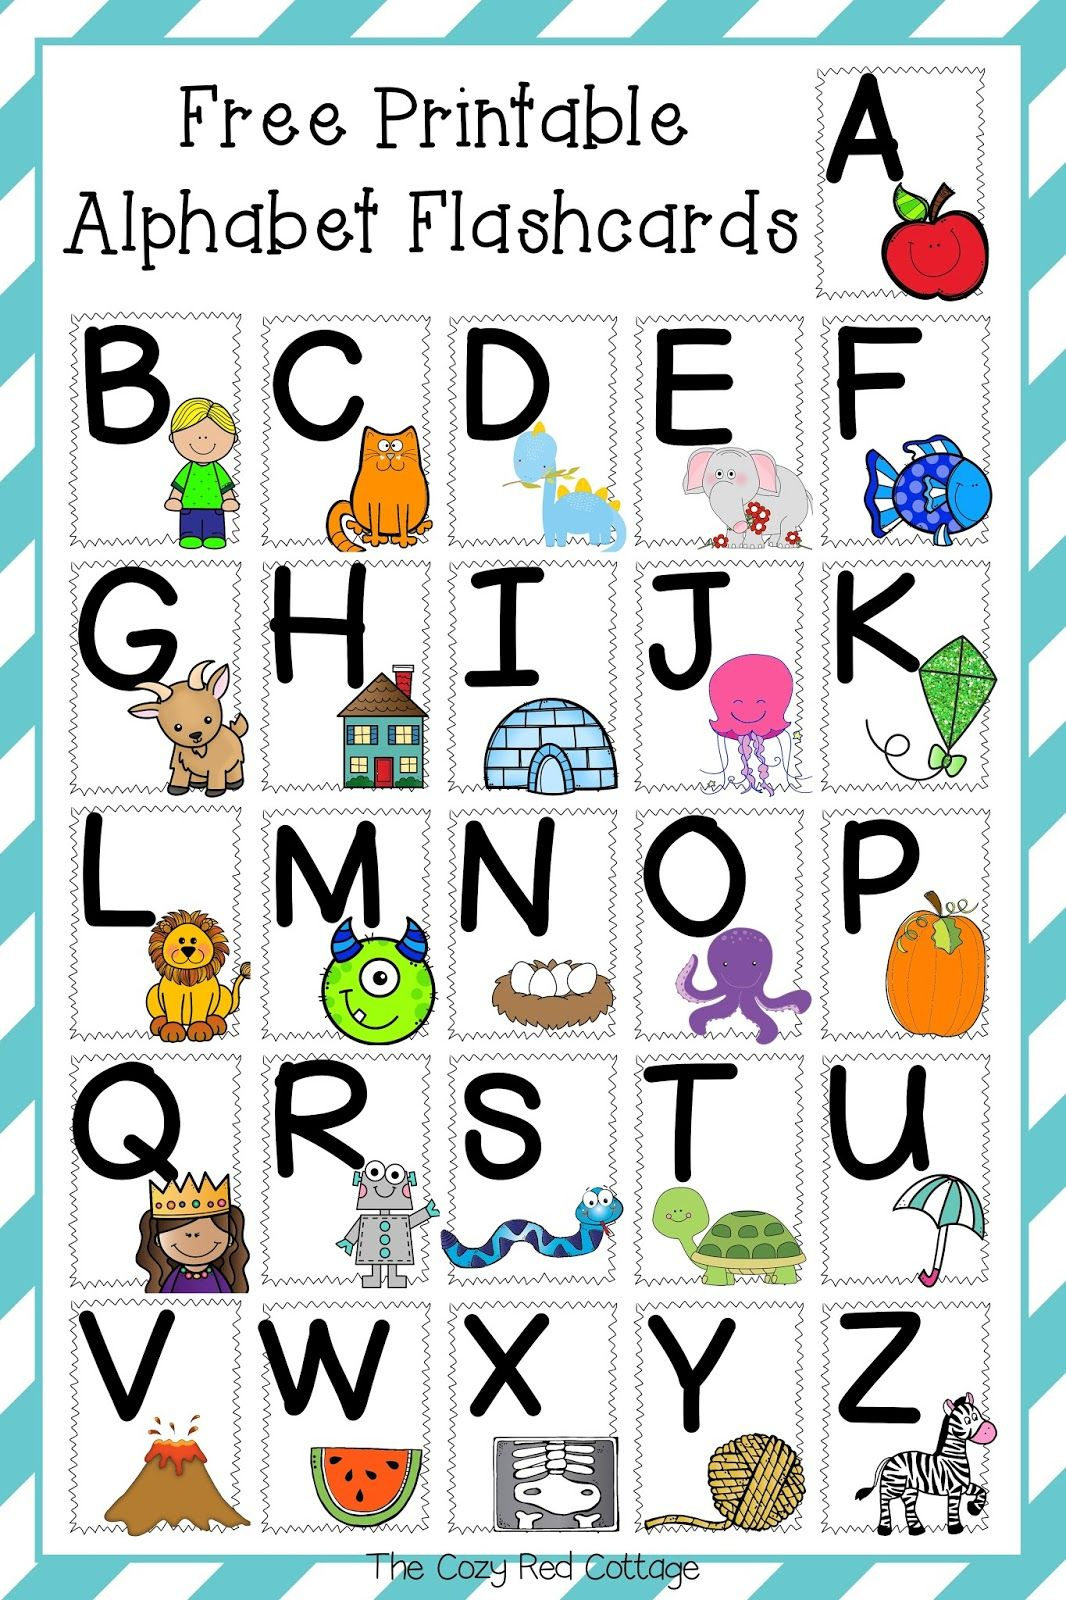 Free Printable Alphabet Flashcards | Alphabet Flashcards, Abc within Free Printable Abc Flashcards With Pictures